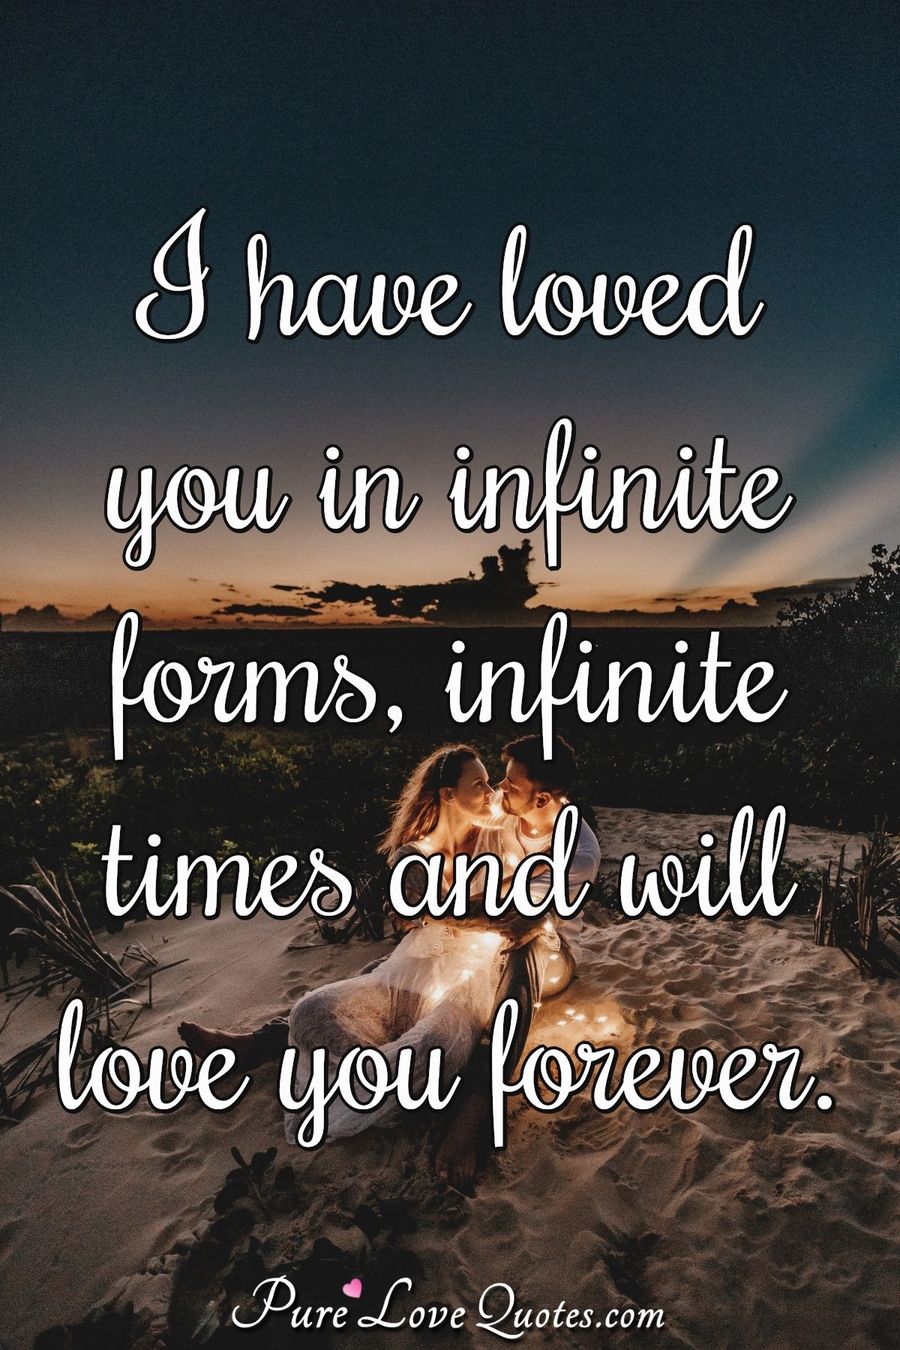 I have loved you in infinite forms infinite times and 